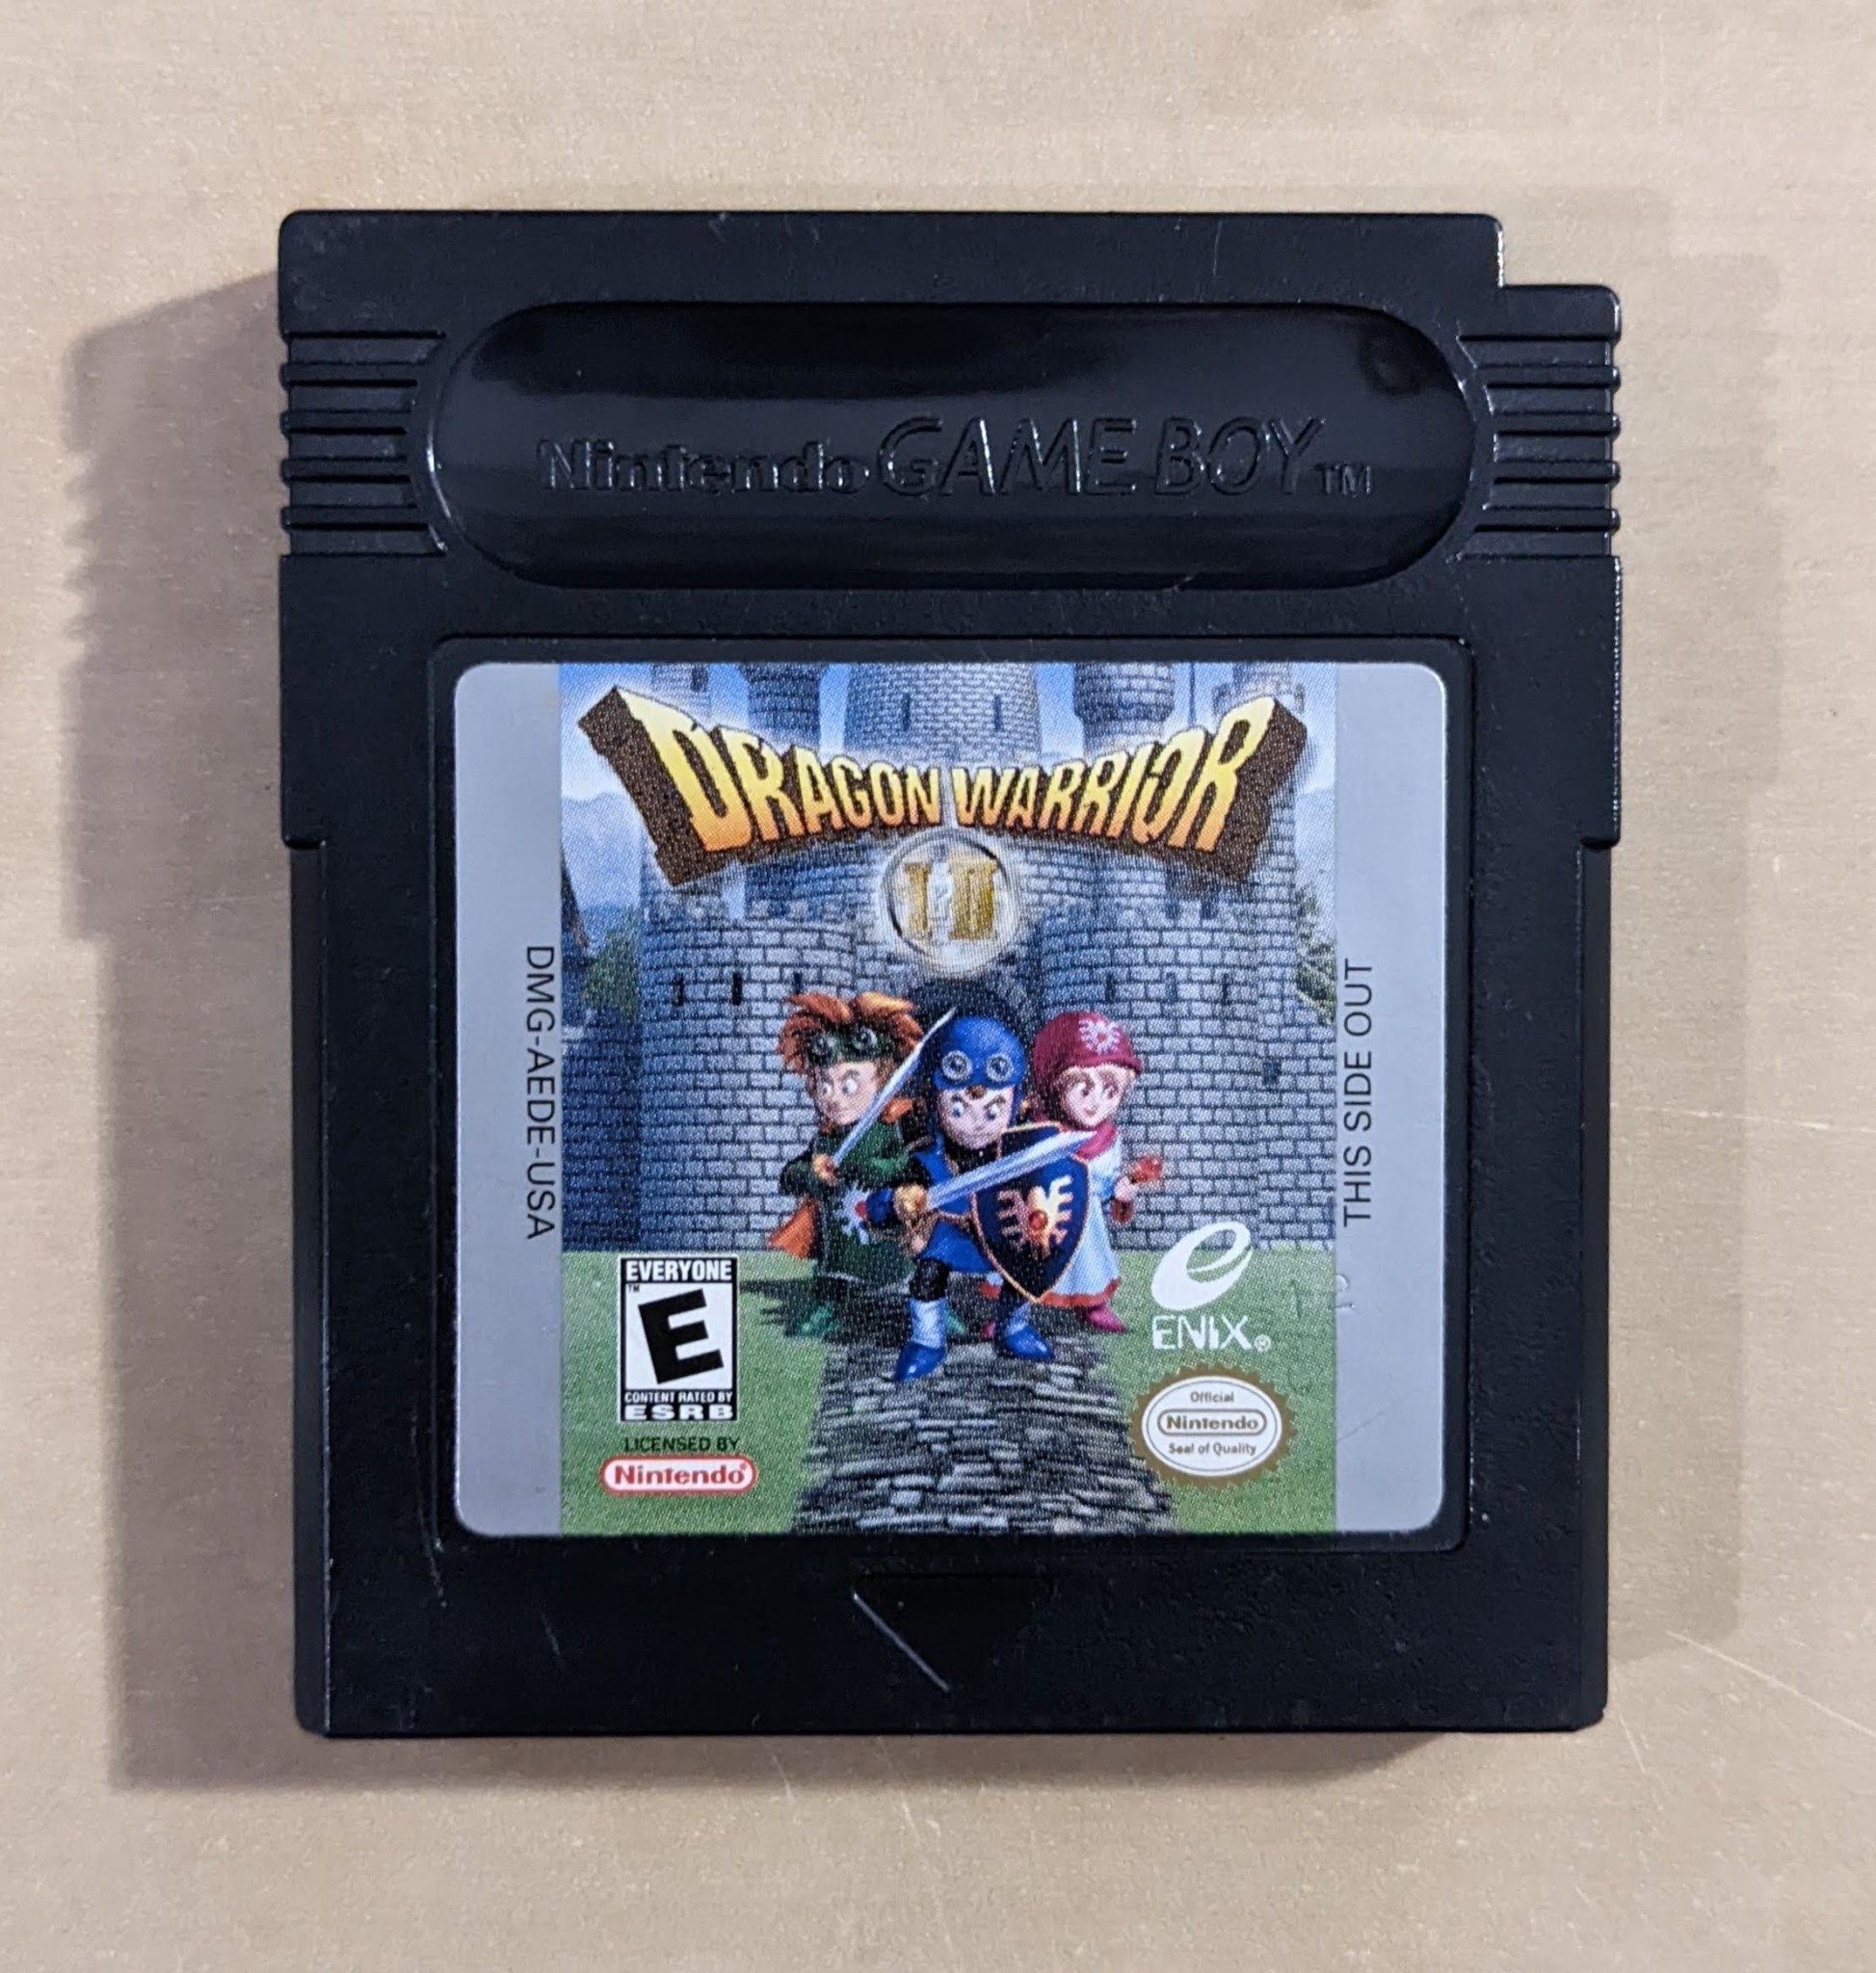 Used Game - Game Boy Color - Dragon Warrior I & II [Cart Only]